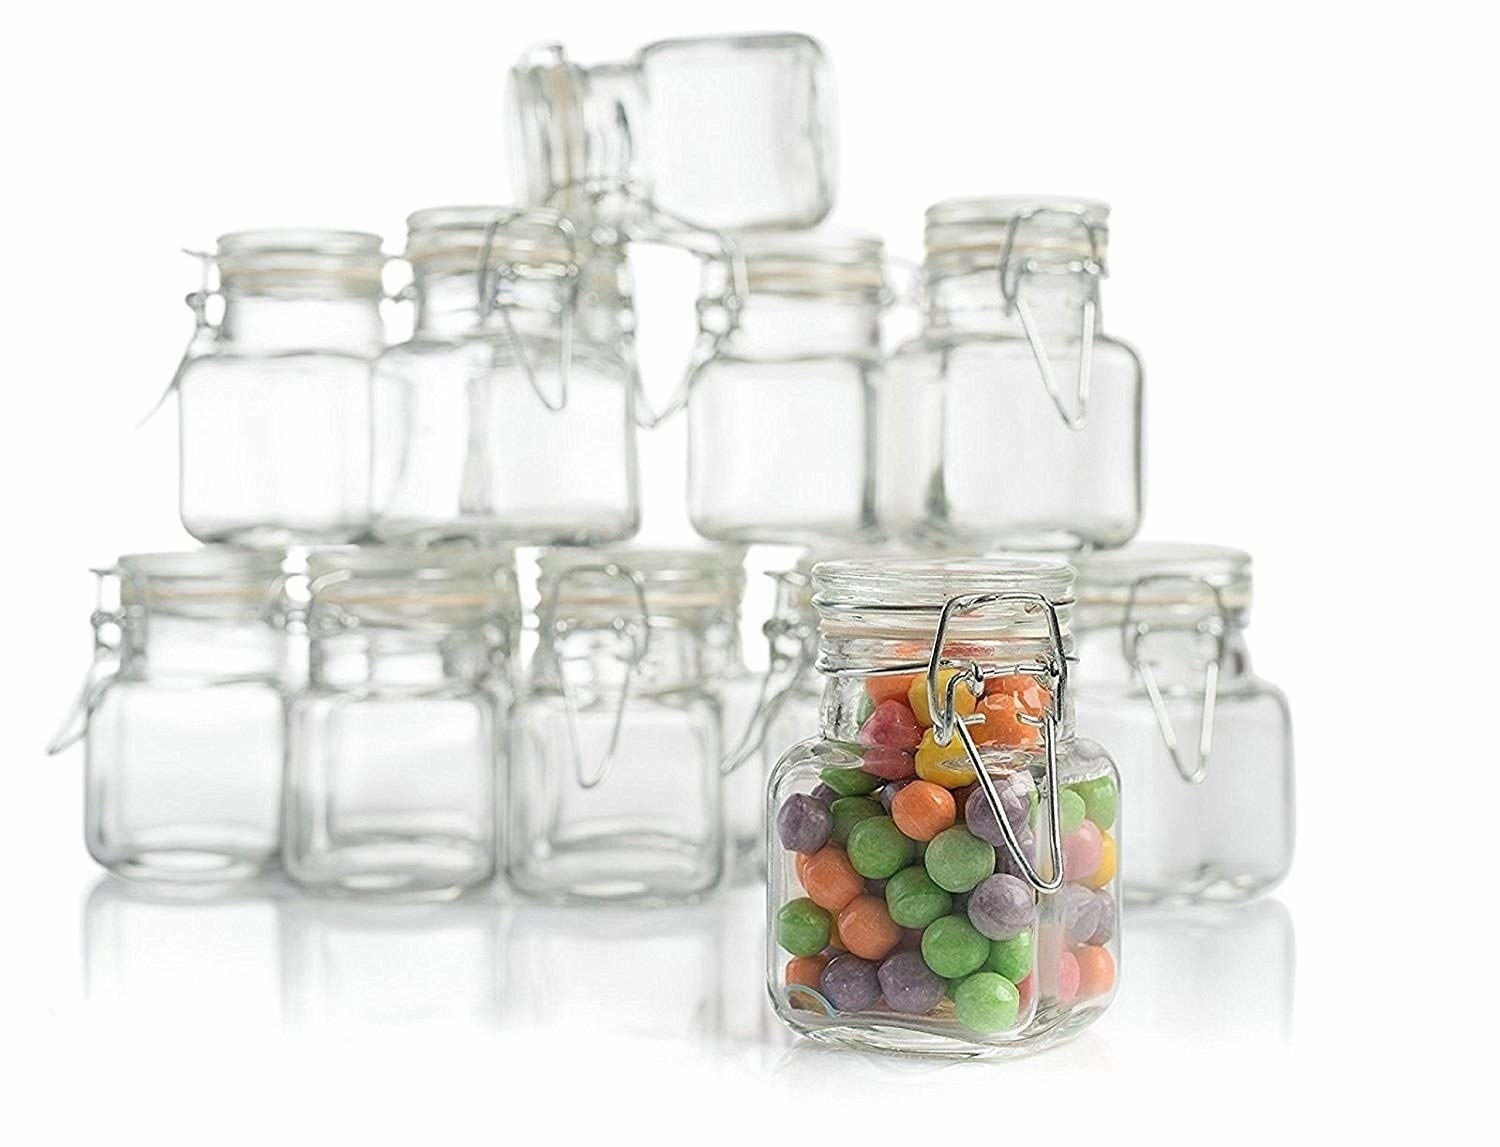 24 Cheap And Clever Wedding Favors You Can Buy In Bulk1500 x 1147